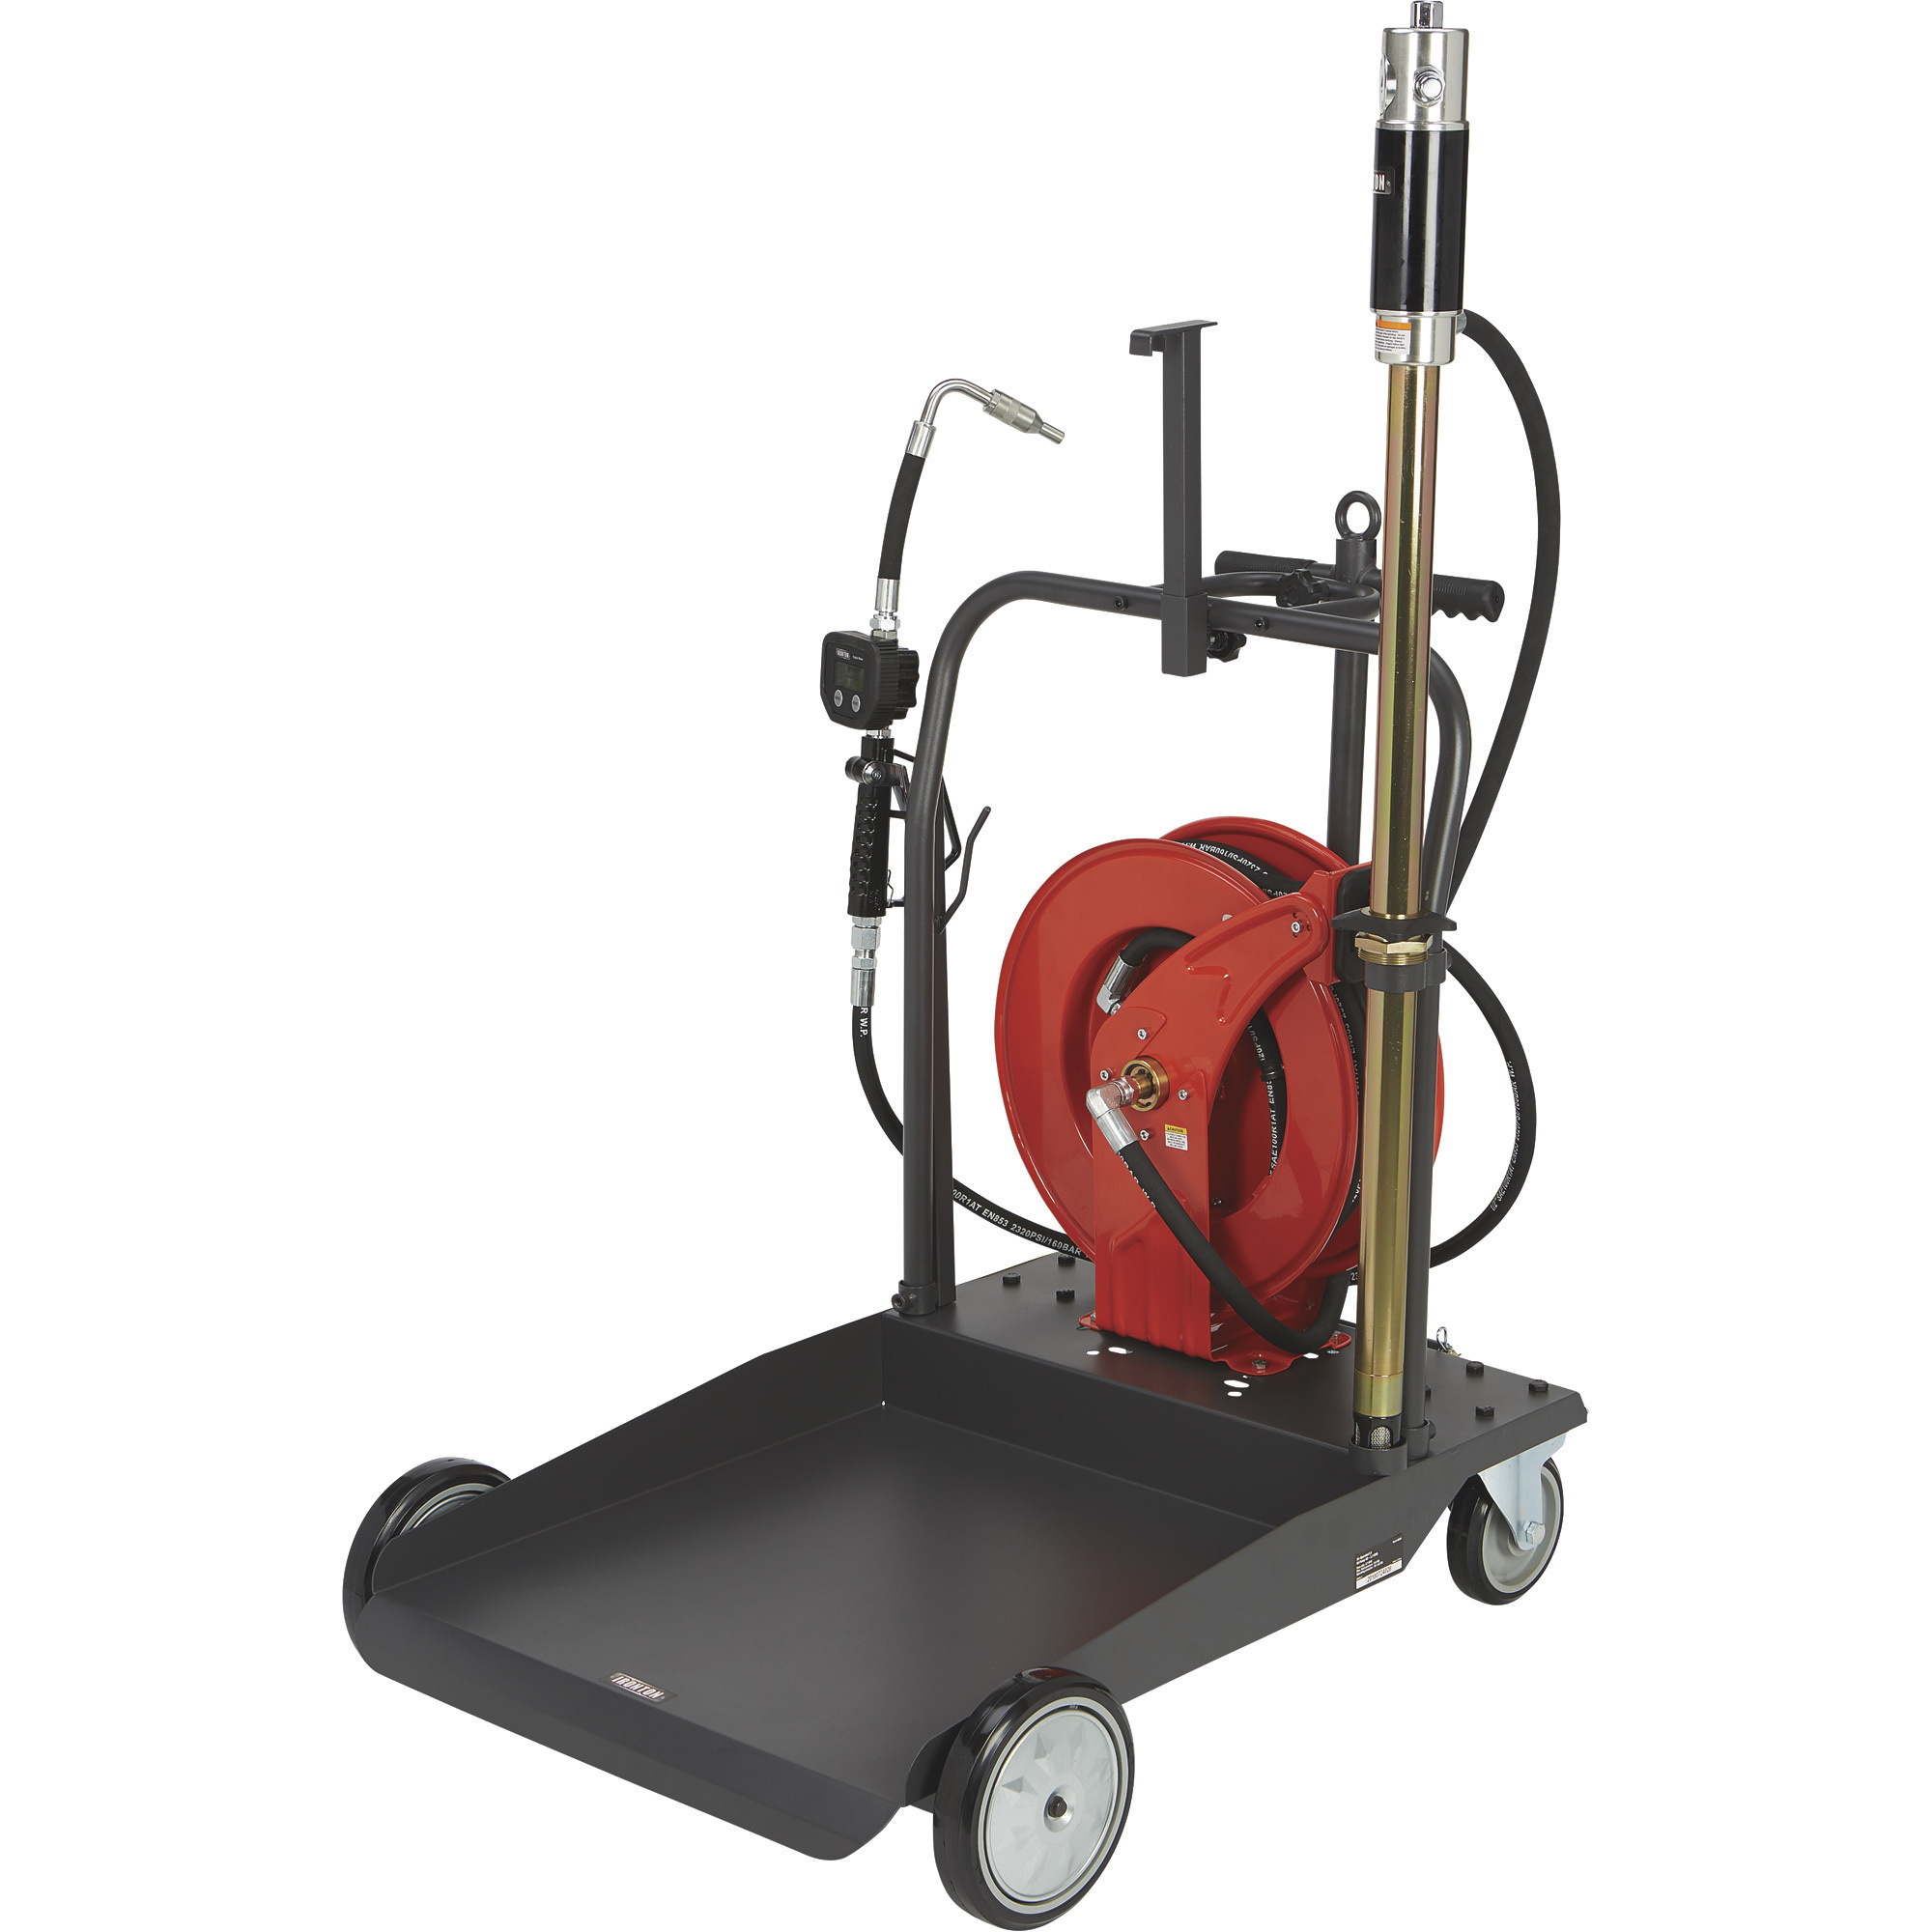 Ironton Air-Operated 5:1 Oil Pump Kit, With Cart and Hose Reel